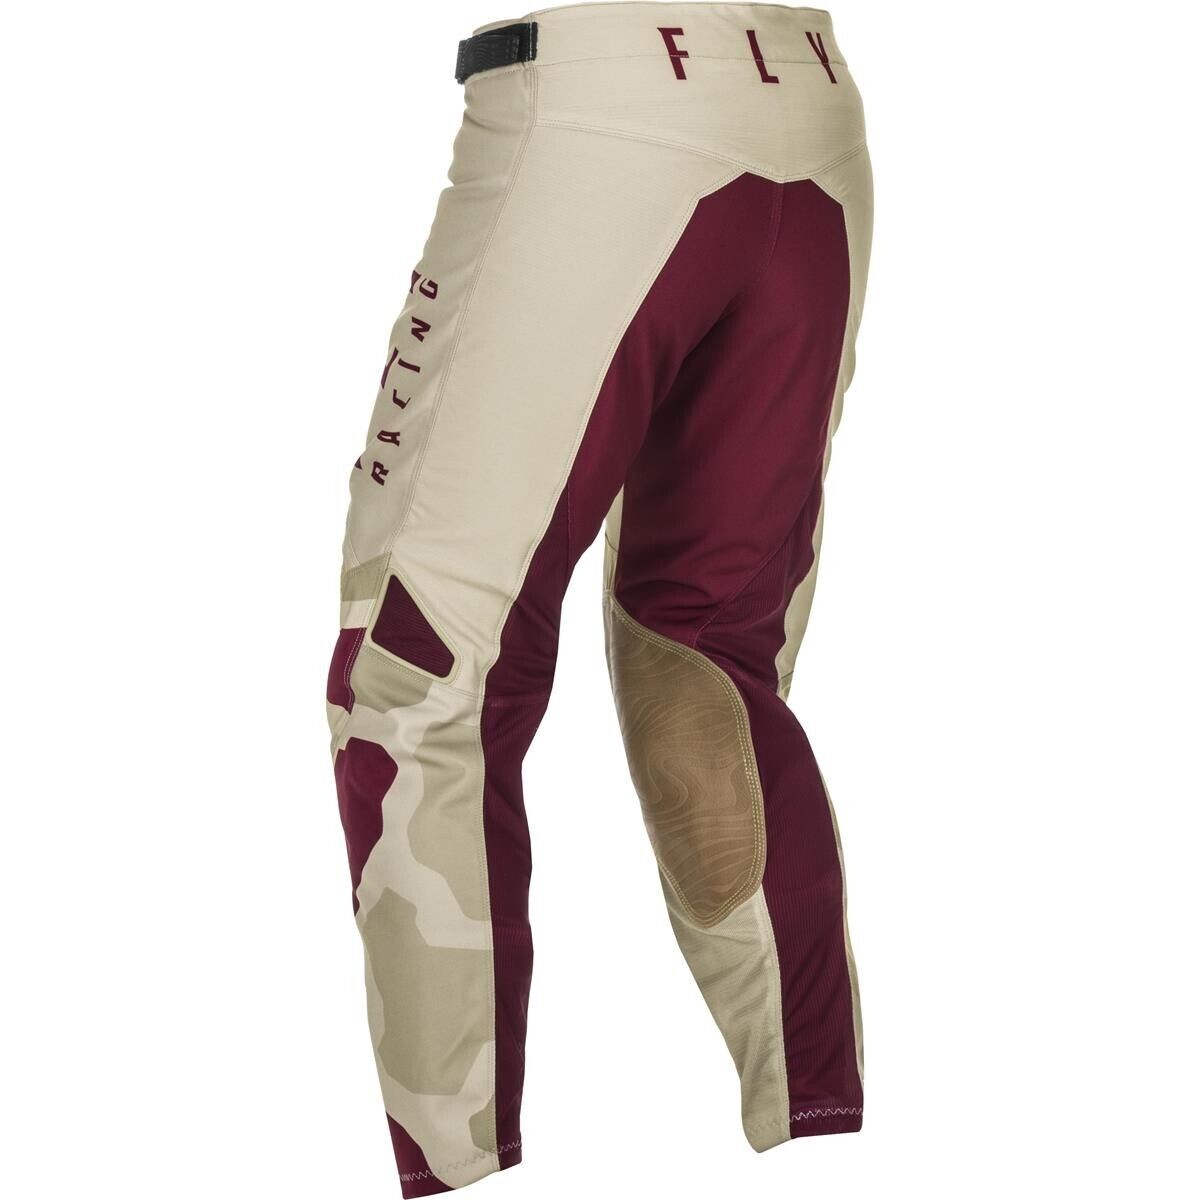 NEW Fly Racing Kinetic K221 Pants (2021) Stone/Berry SIZE 28 374-53728